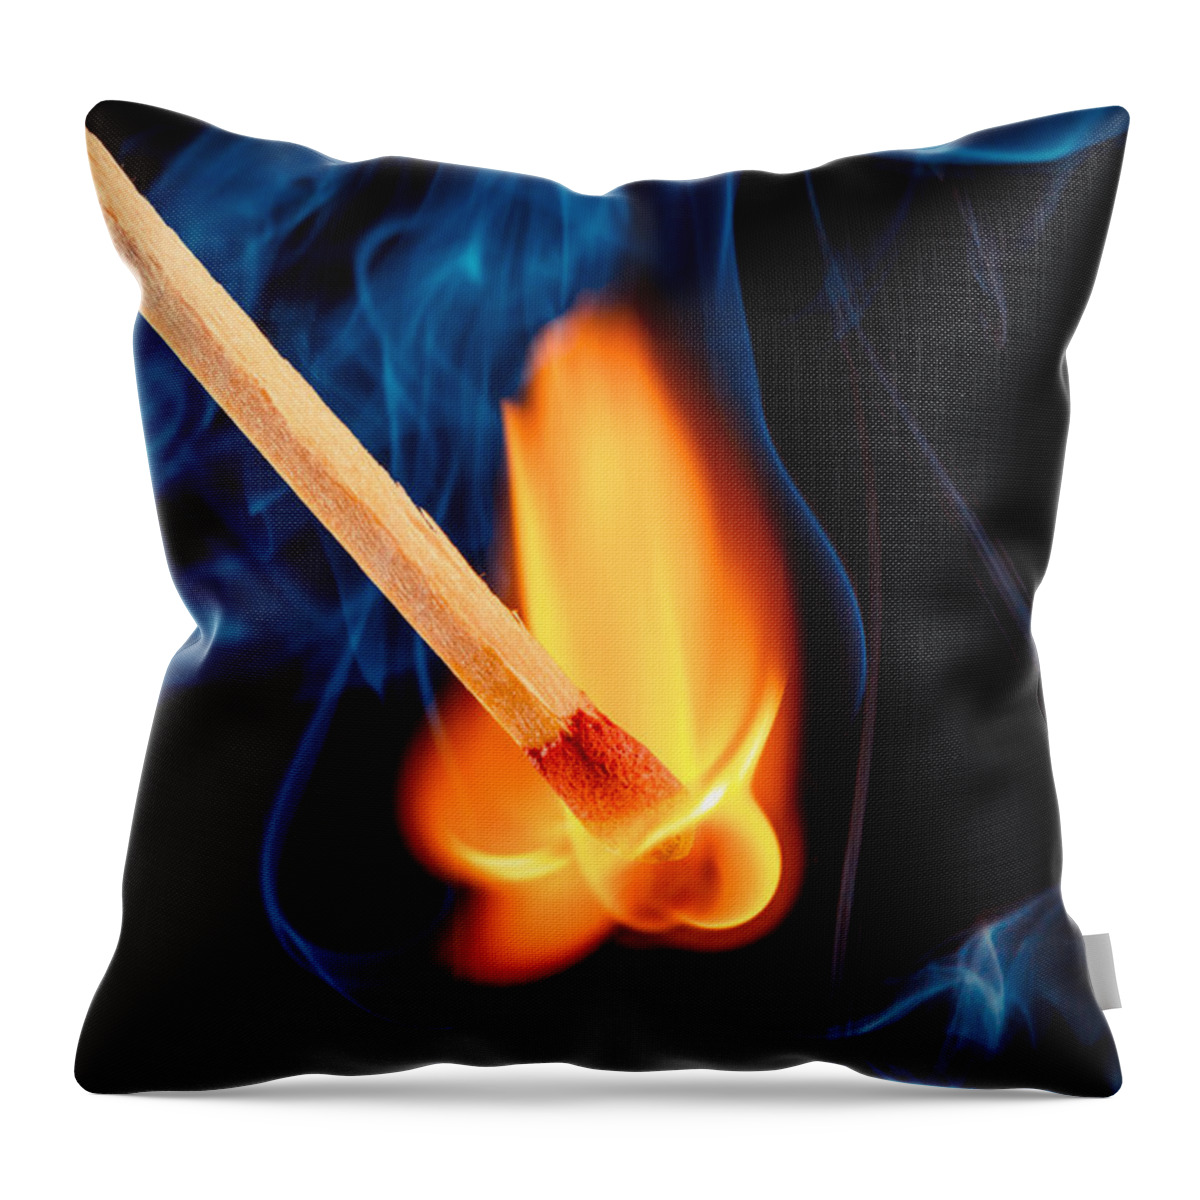 Flame Throw Pillow featuring the photograph Beyond The Flame by TC Morgan